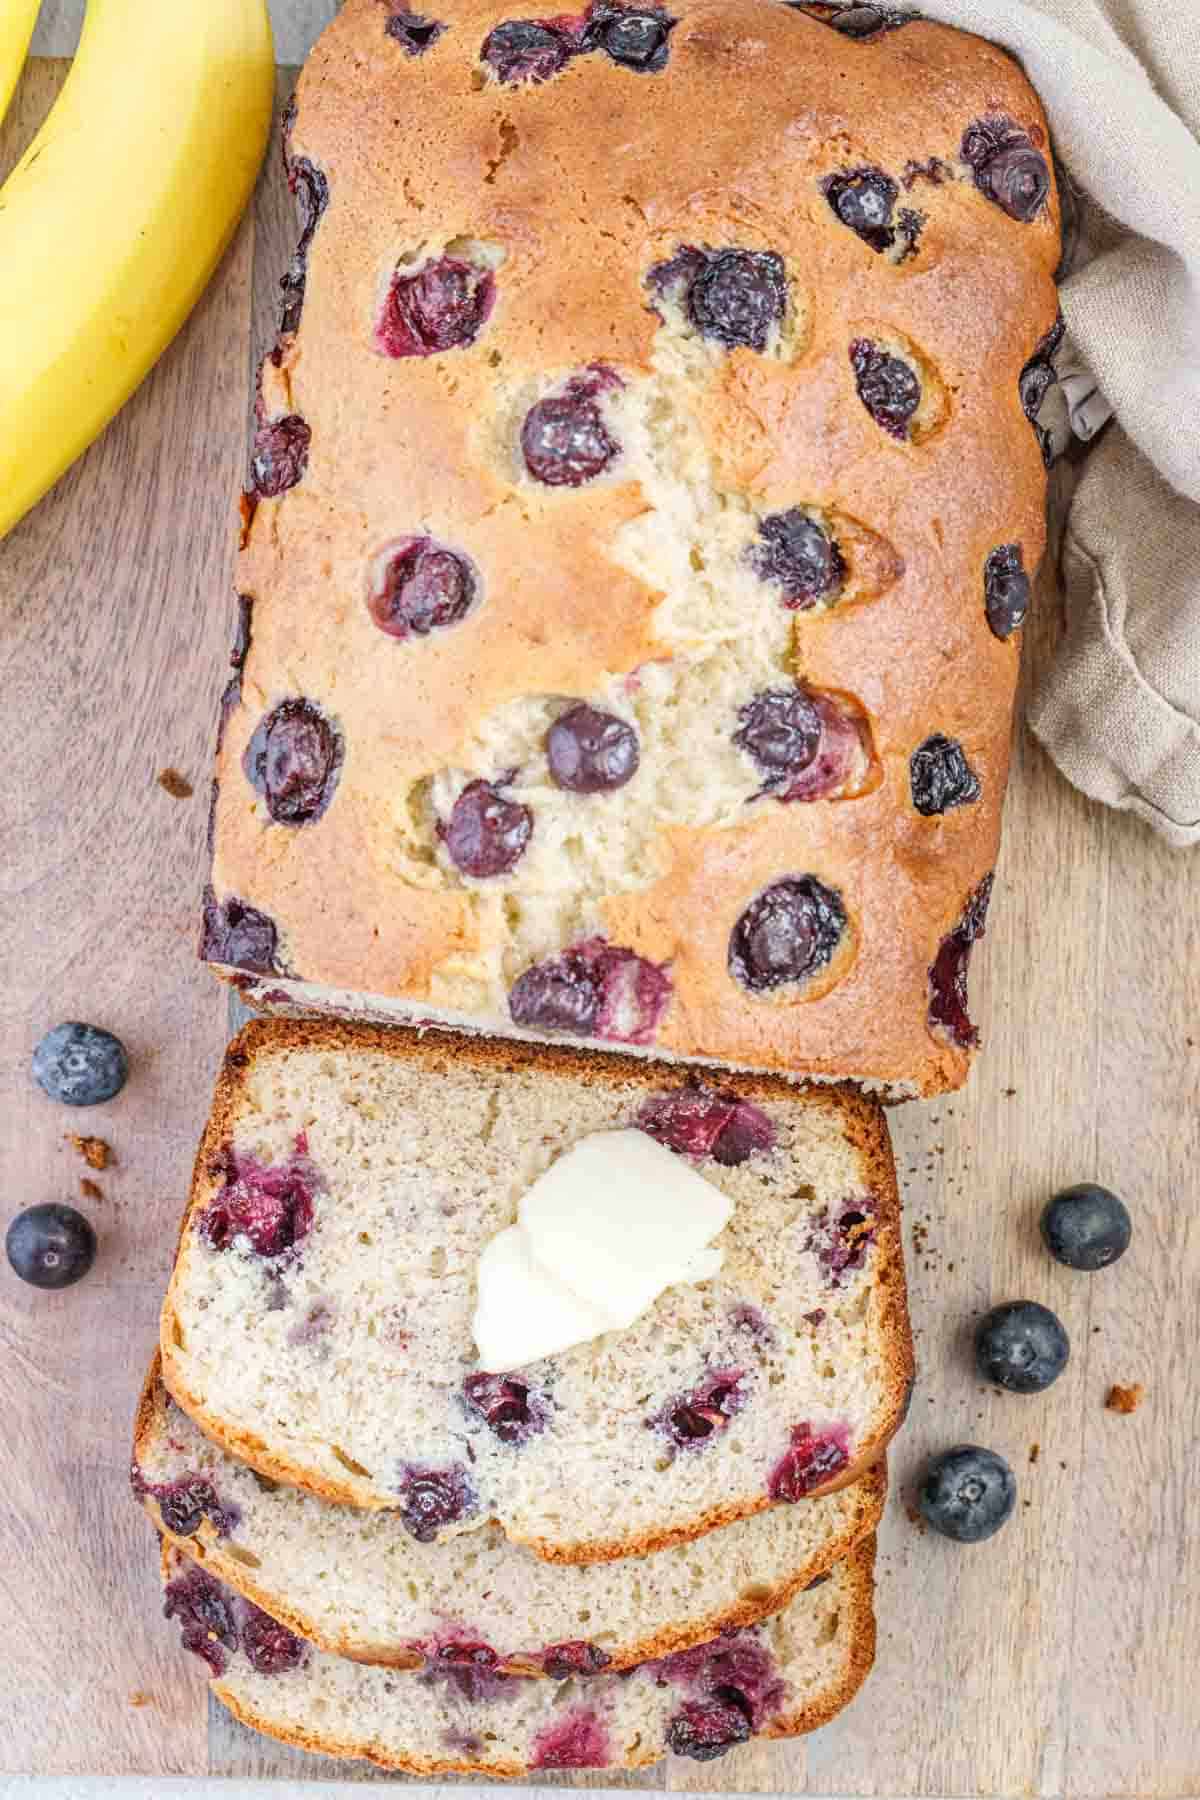 Slices of blueberry banana bread with butter spread.